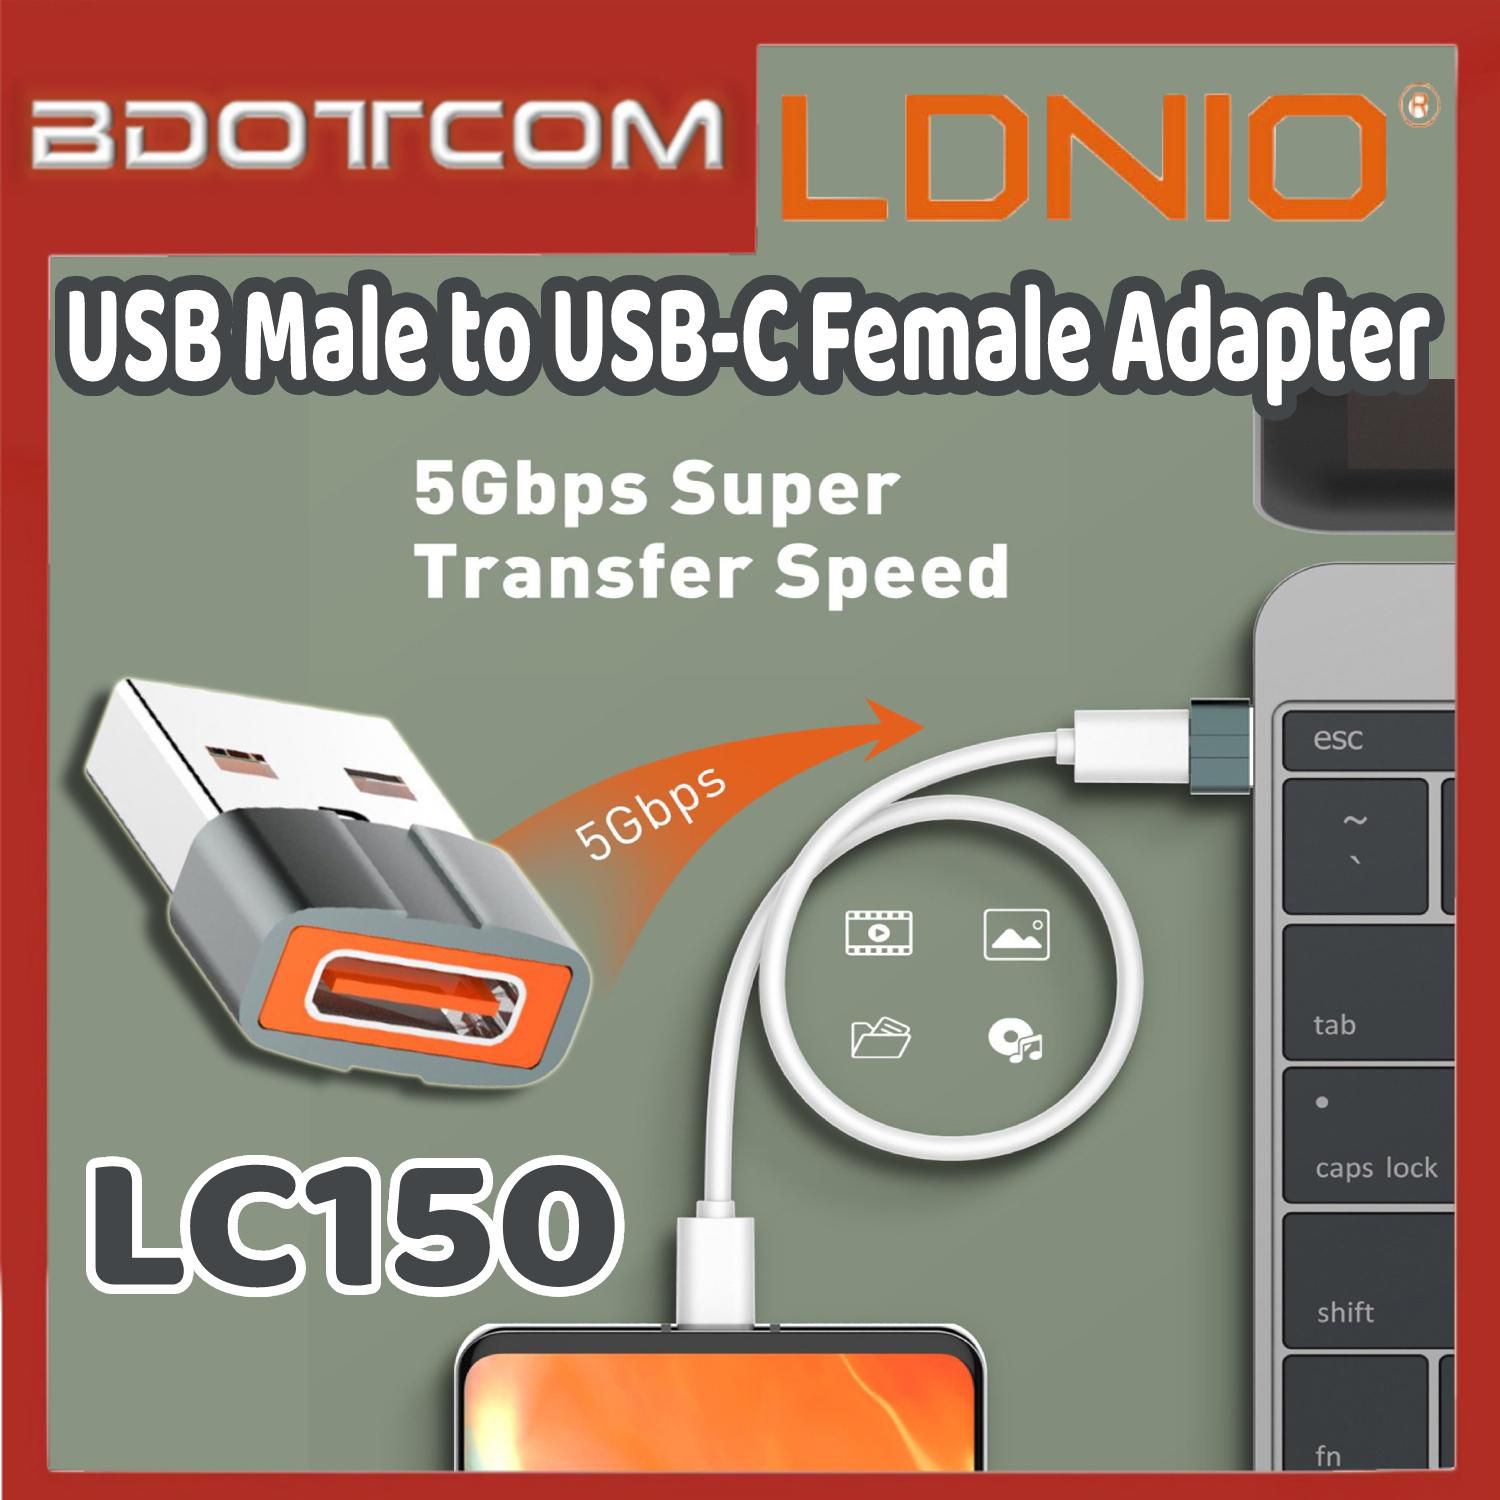 LDNIO LC150 USB Male to USB-C Female Adapter for Samsung / Huawei / Xiaomi